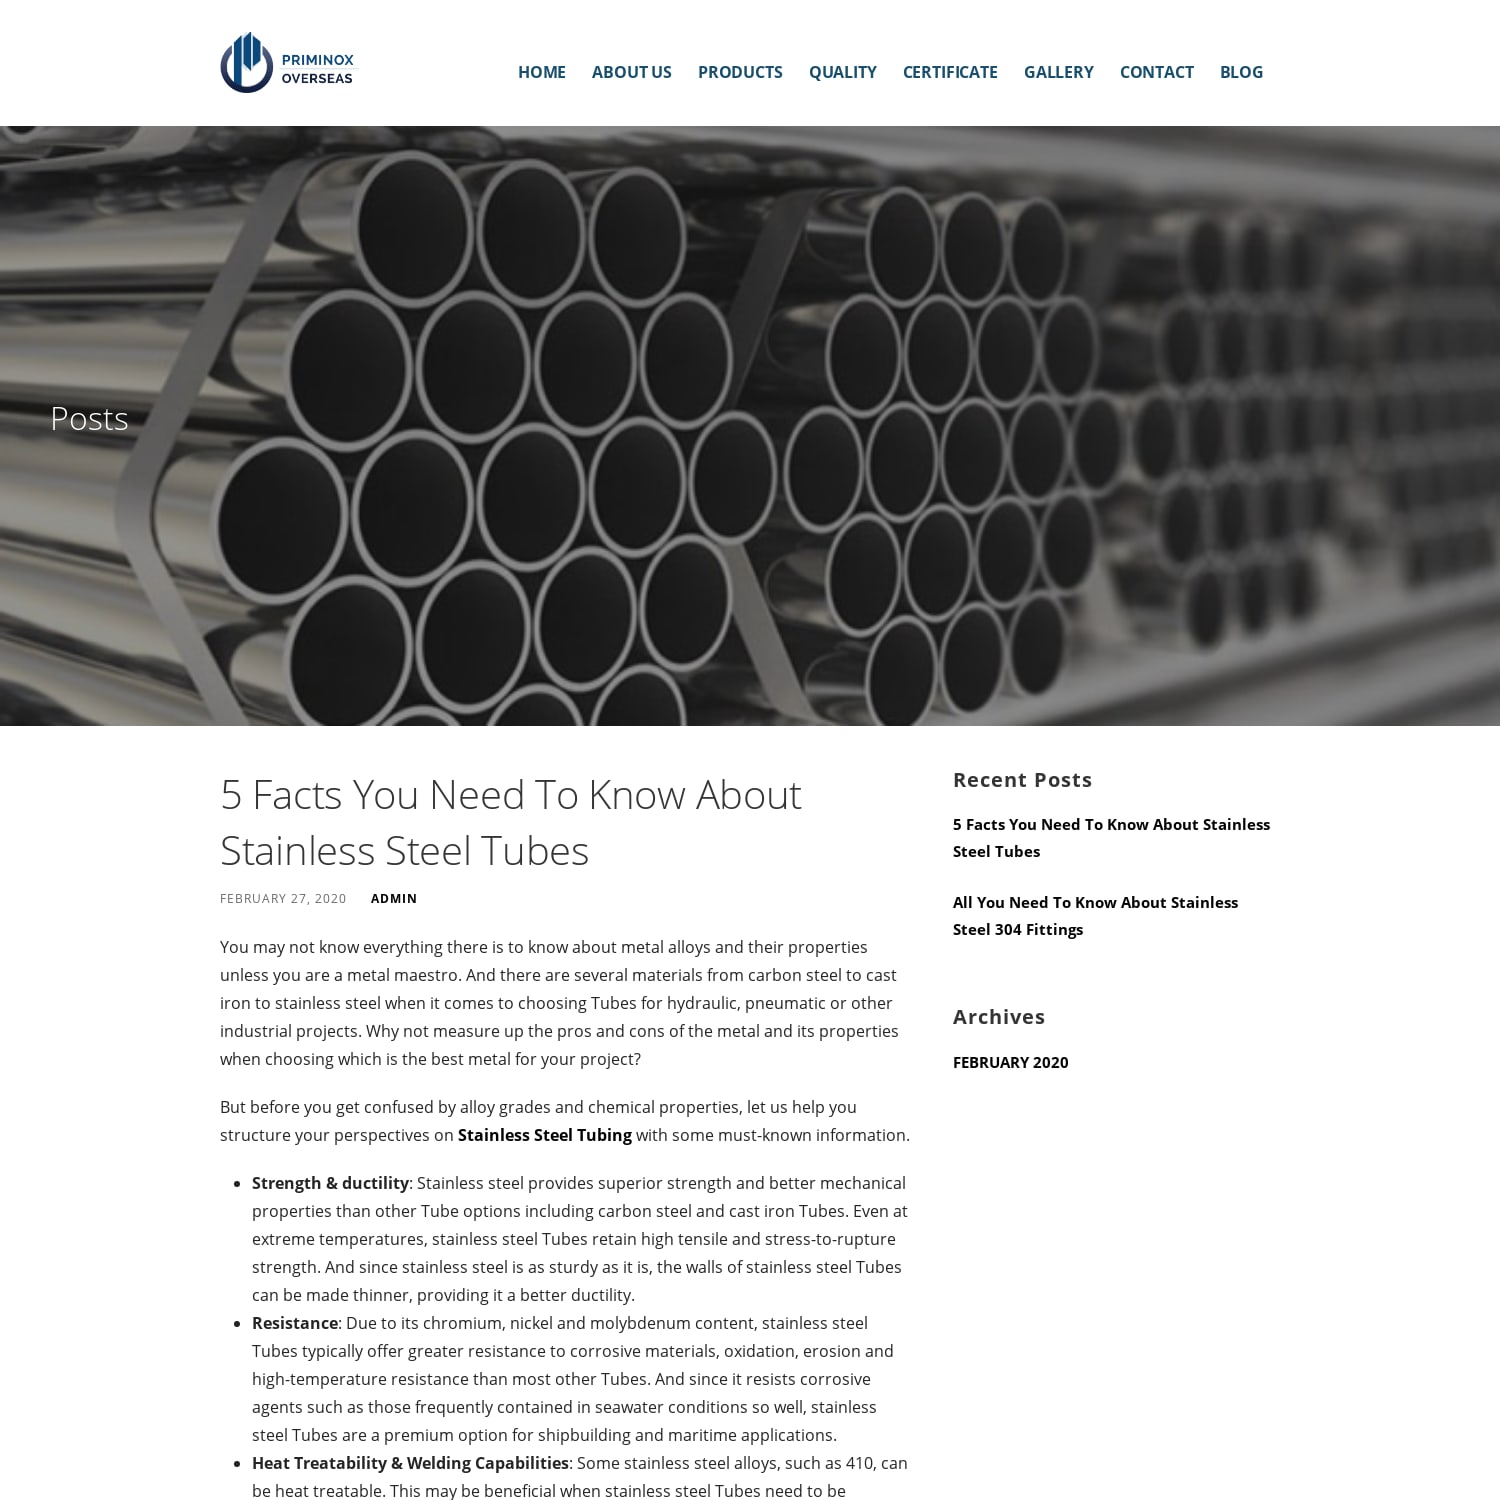 5 Facts You Need To Know About Stainless Steel Tubes